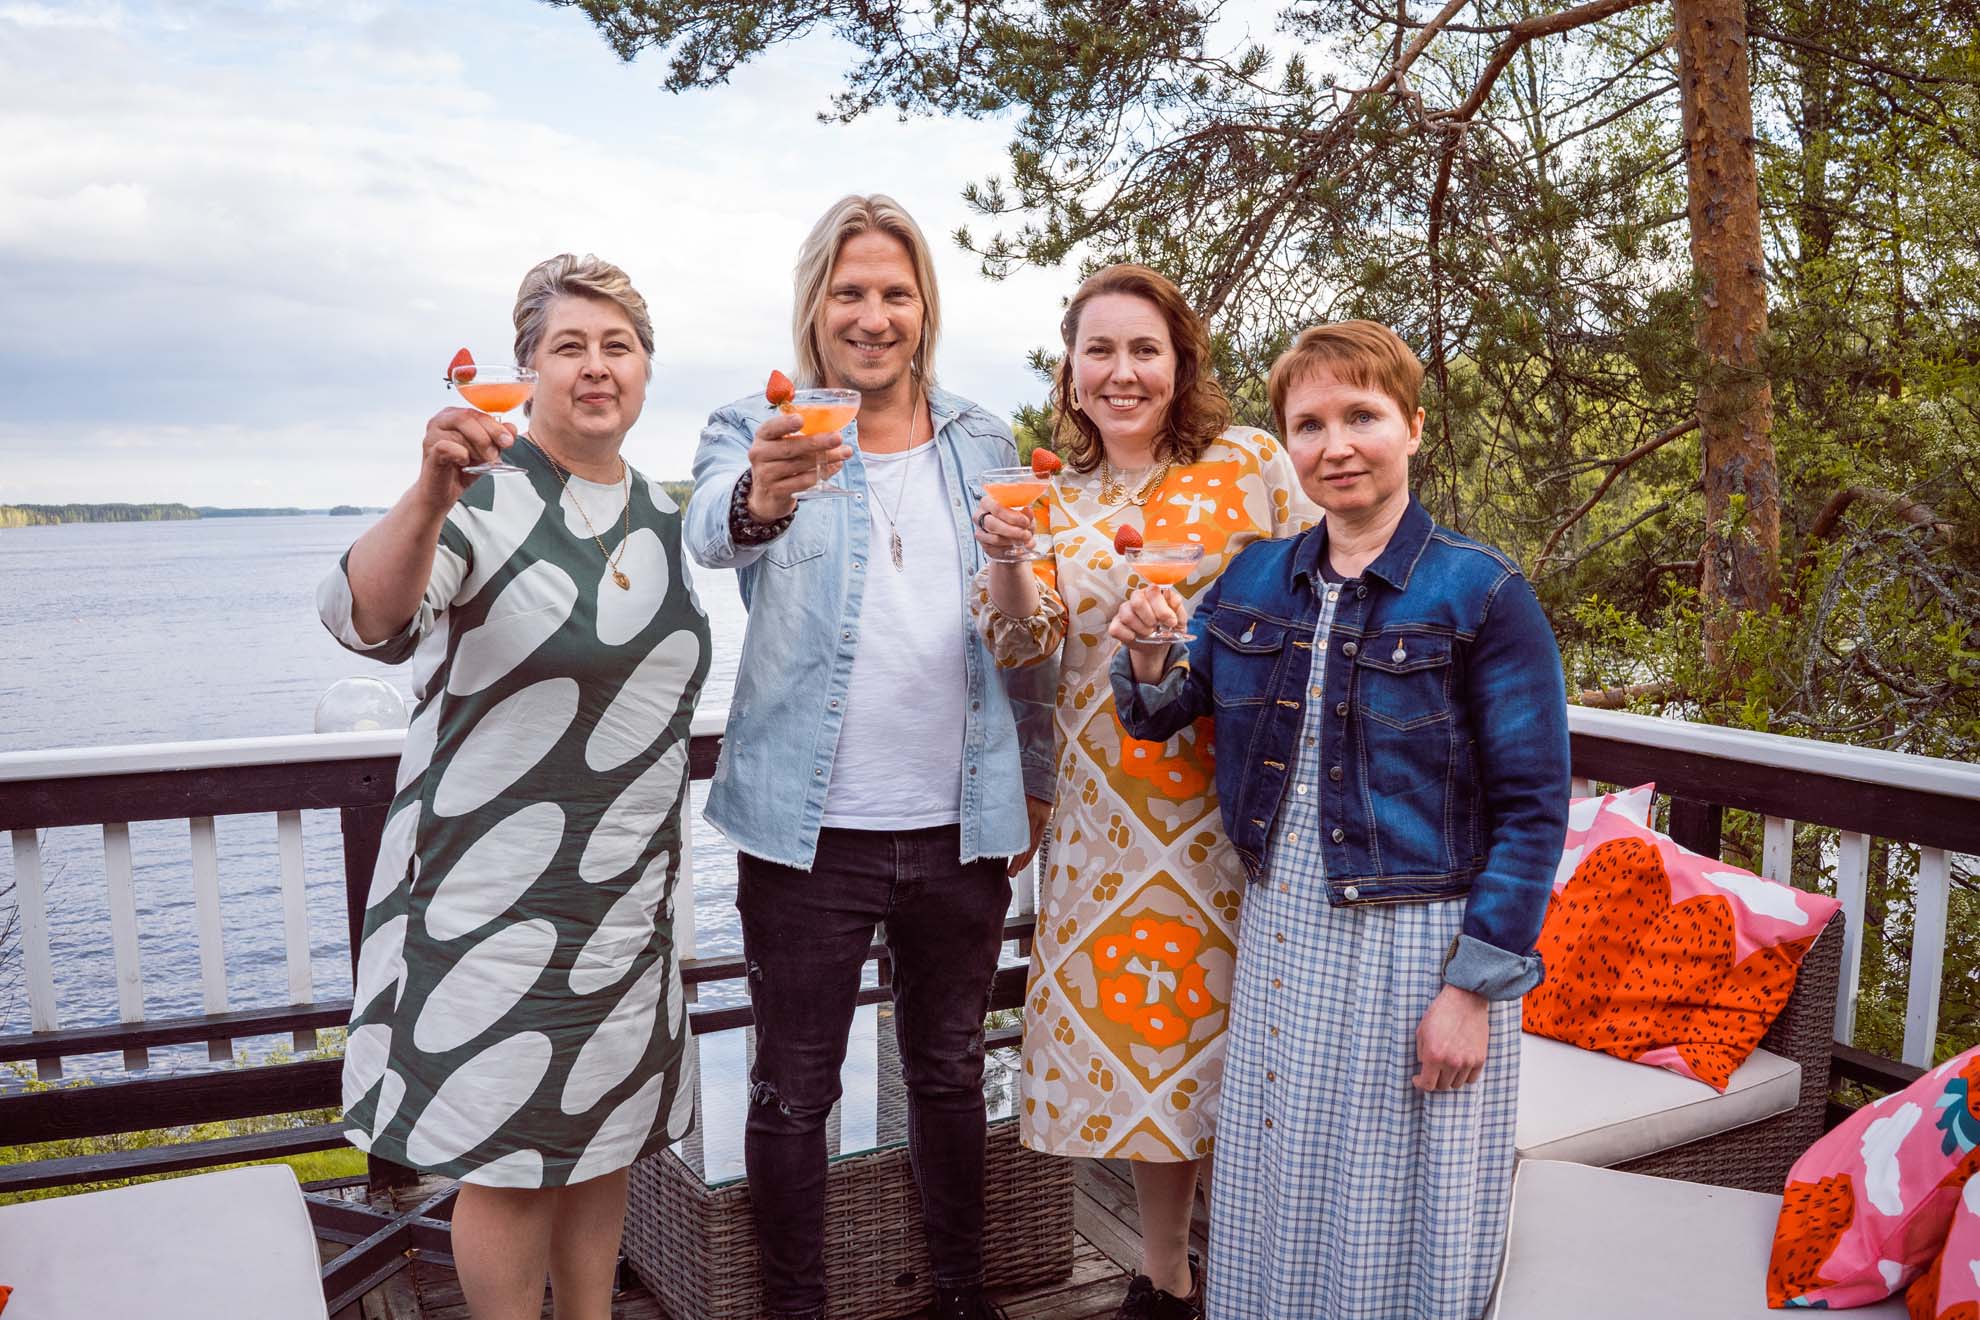 Sami Kuronen will bring the rich culinary culture of Saimaa to Finns' living rooms starting 7.7.2021, when a new TV series starts on the Liv channel.